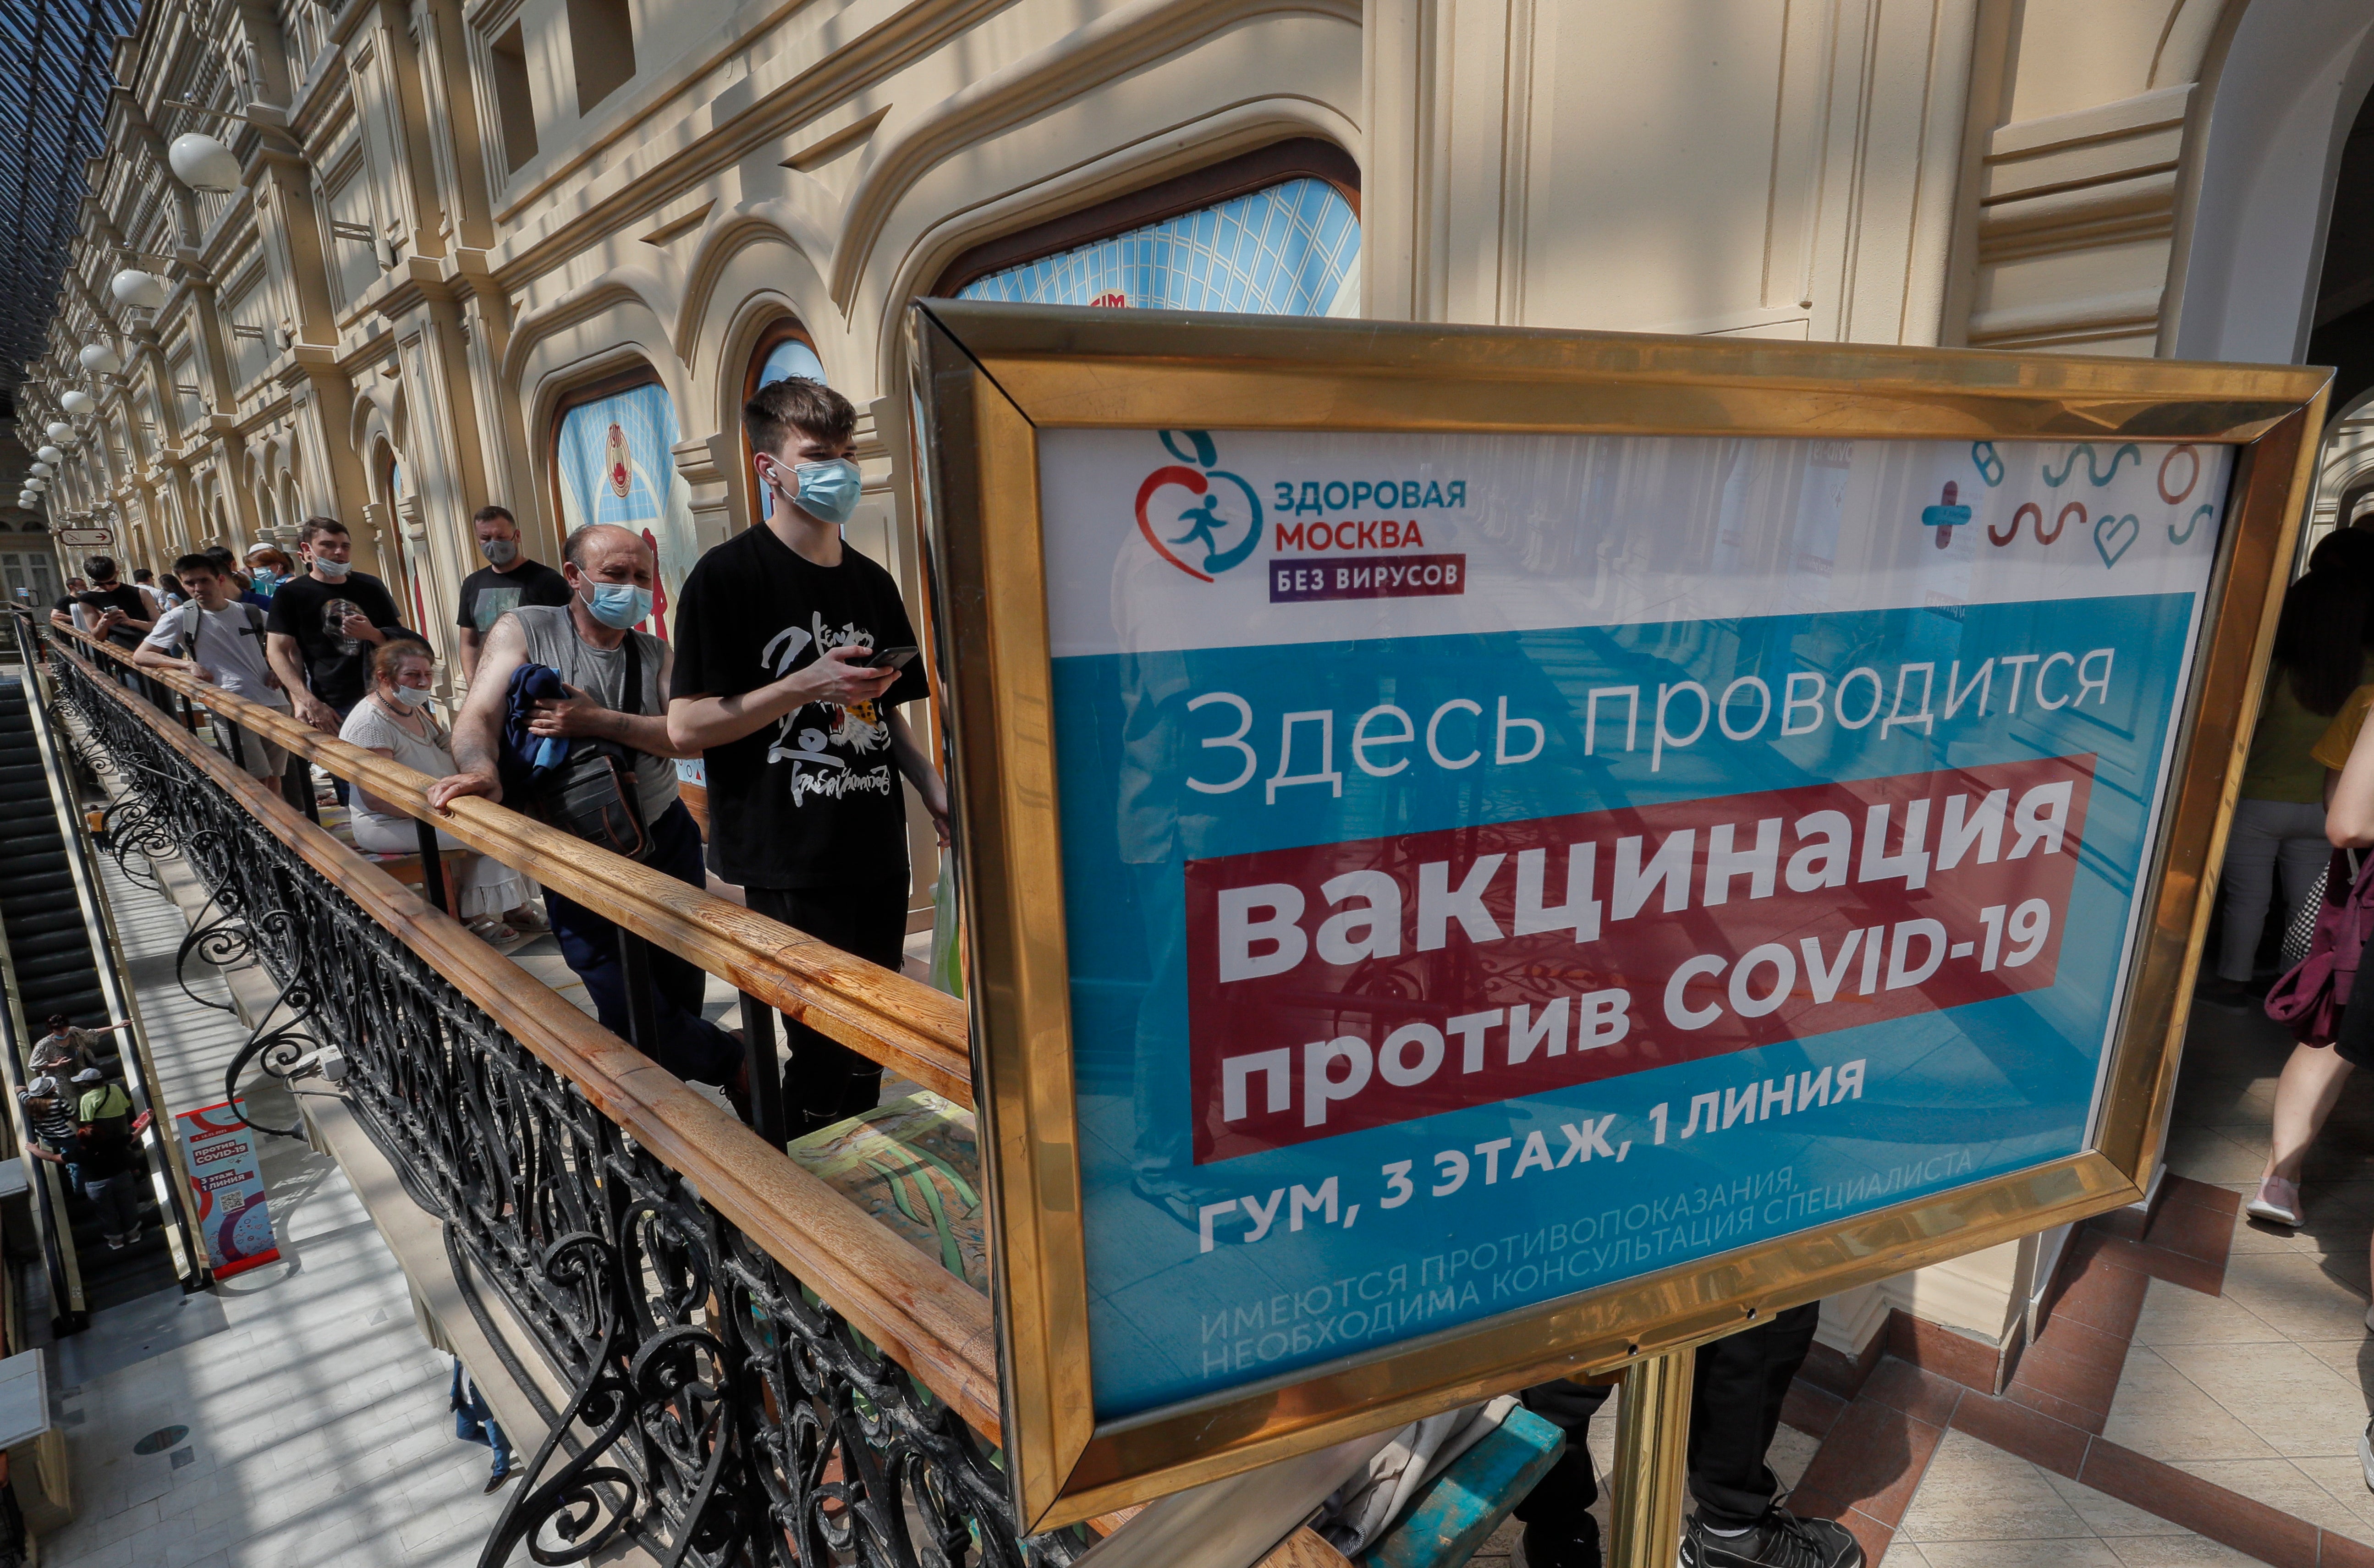 Russian people stand in line waiting to receive an injection of Russia’s Sputnik V